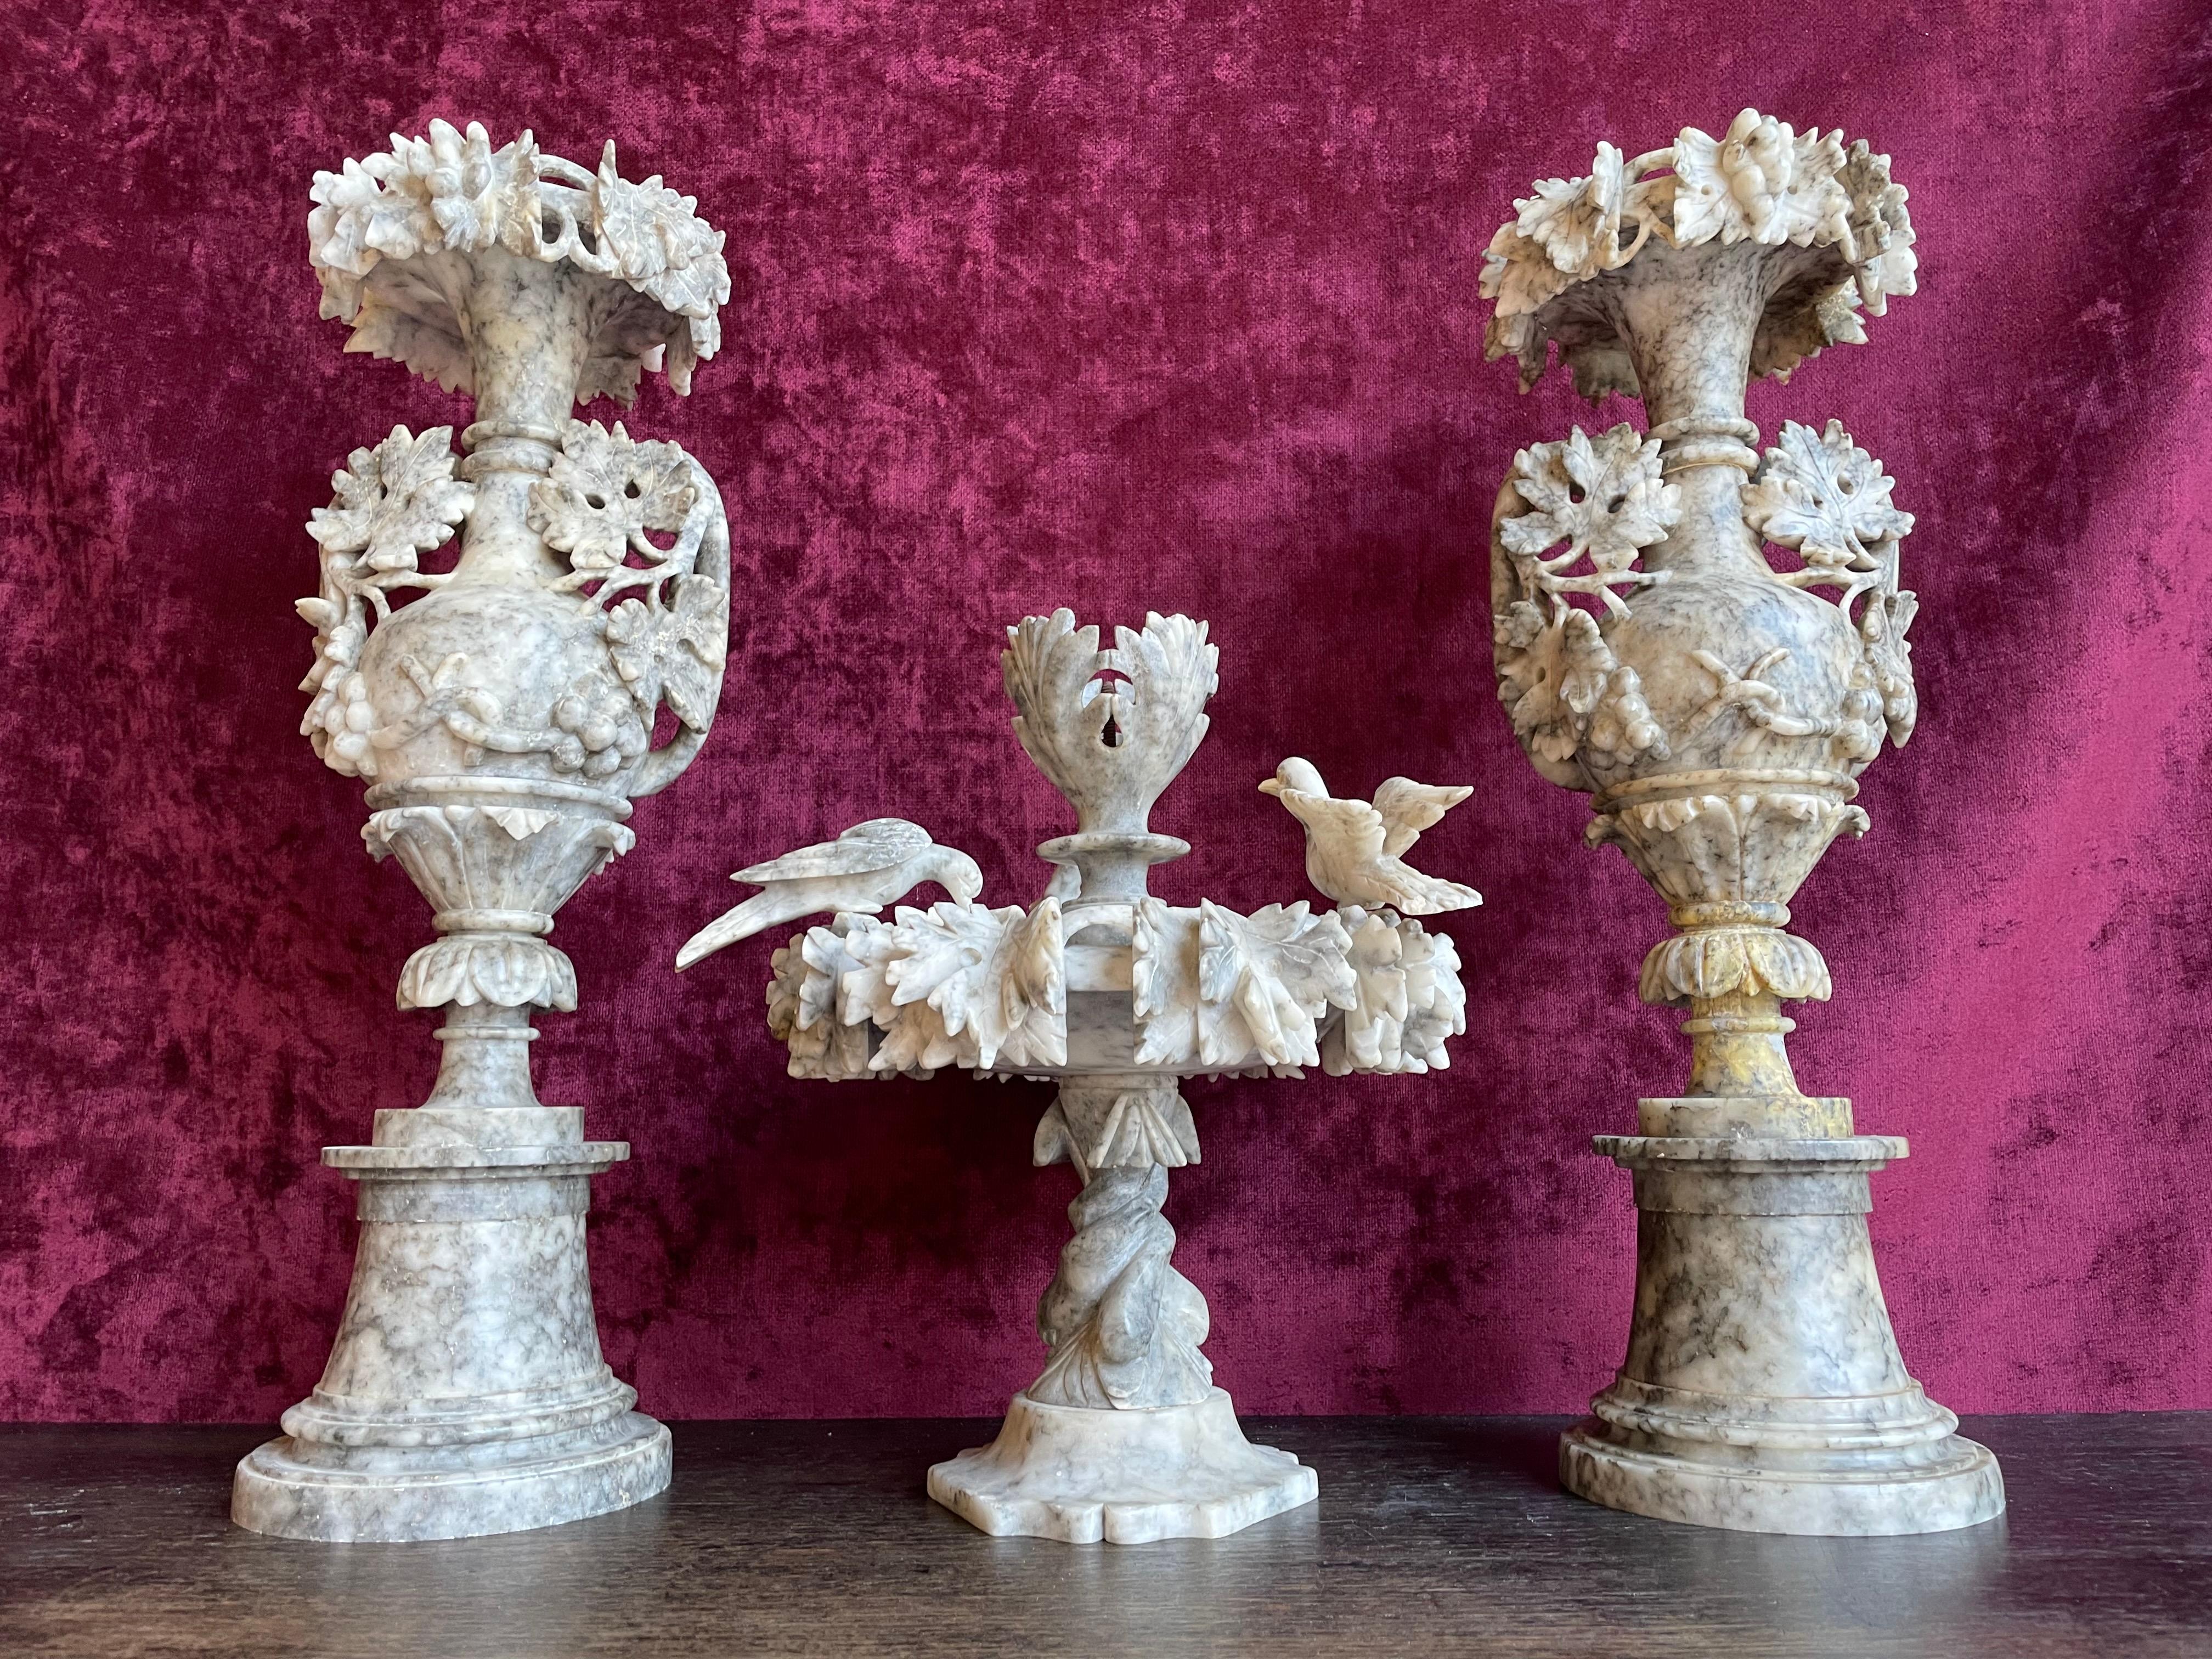 Early 1900s pair of alabaster vases with an alabaster 'fountain' with birds in the middle.

Have you ever tried to hand carve a figure out of a piece of natural mineral stone? Only than you can really come close to having an idea of how remarkable